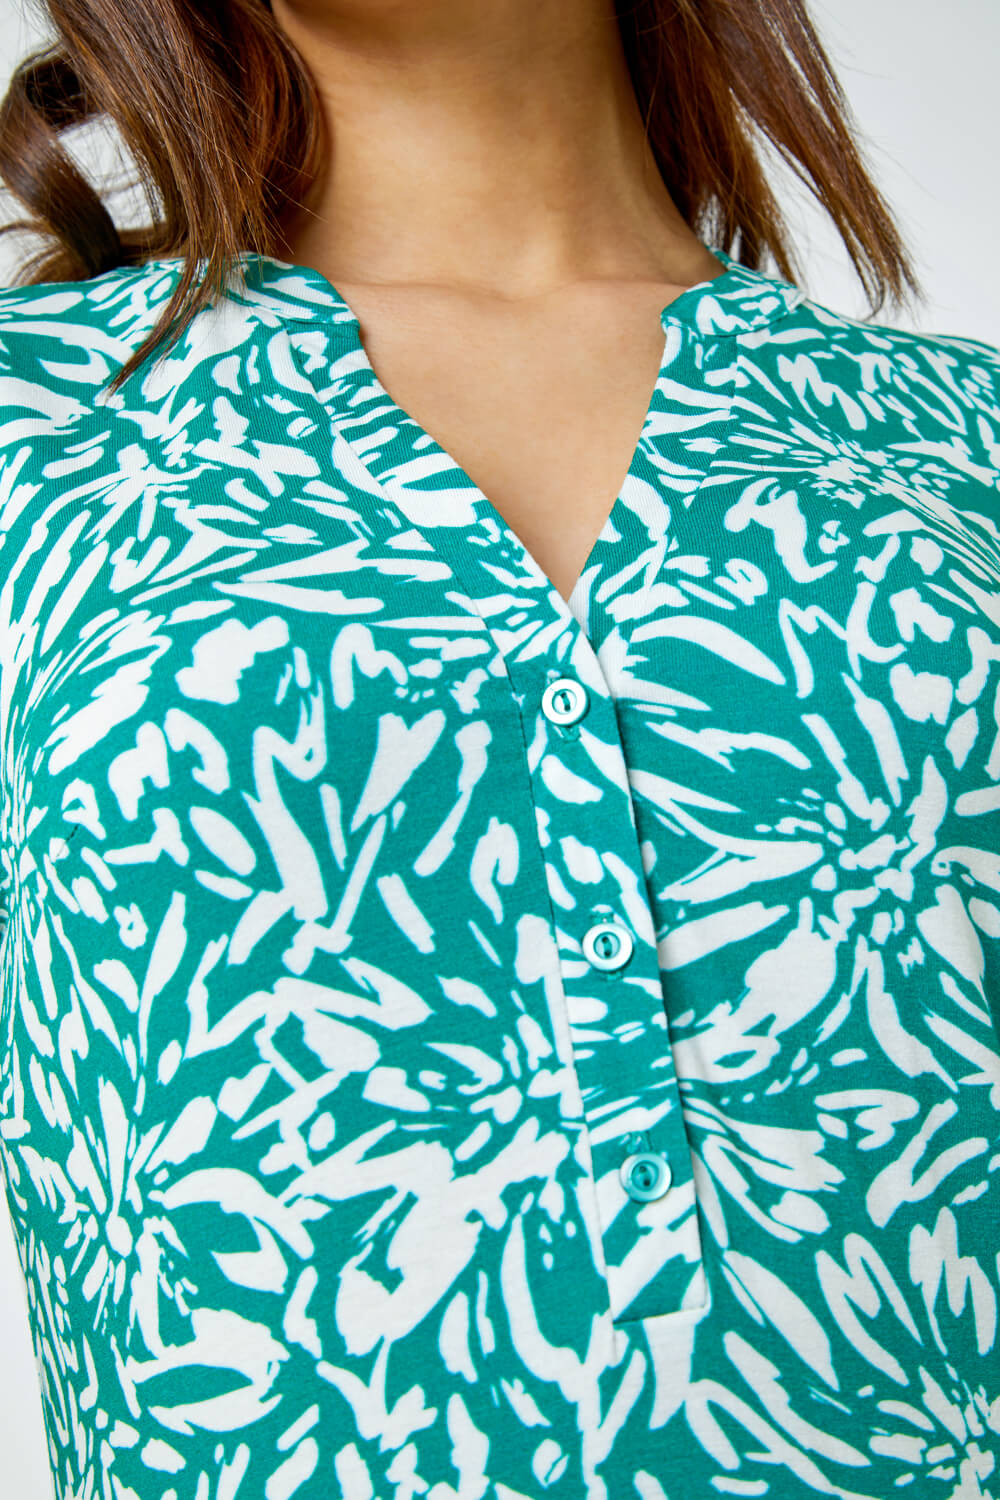 Green Abstract Floral Print Top, Image 5 of 5